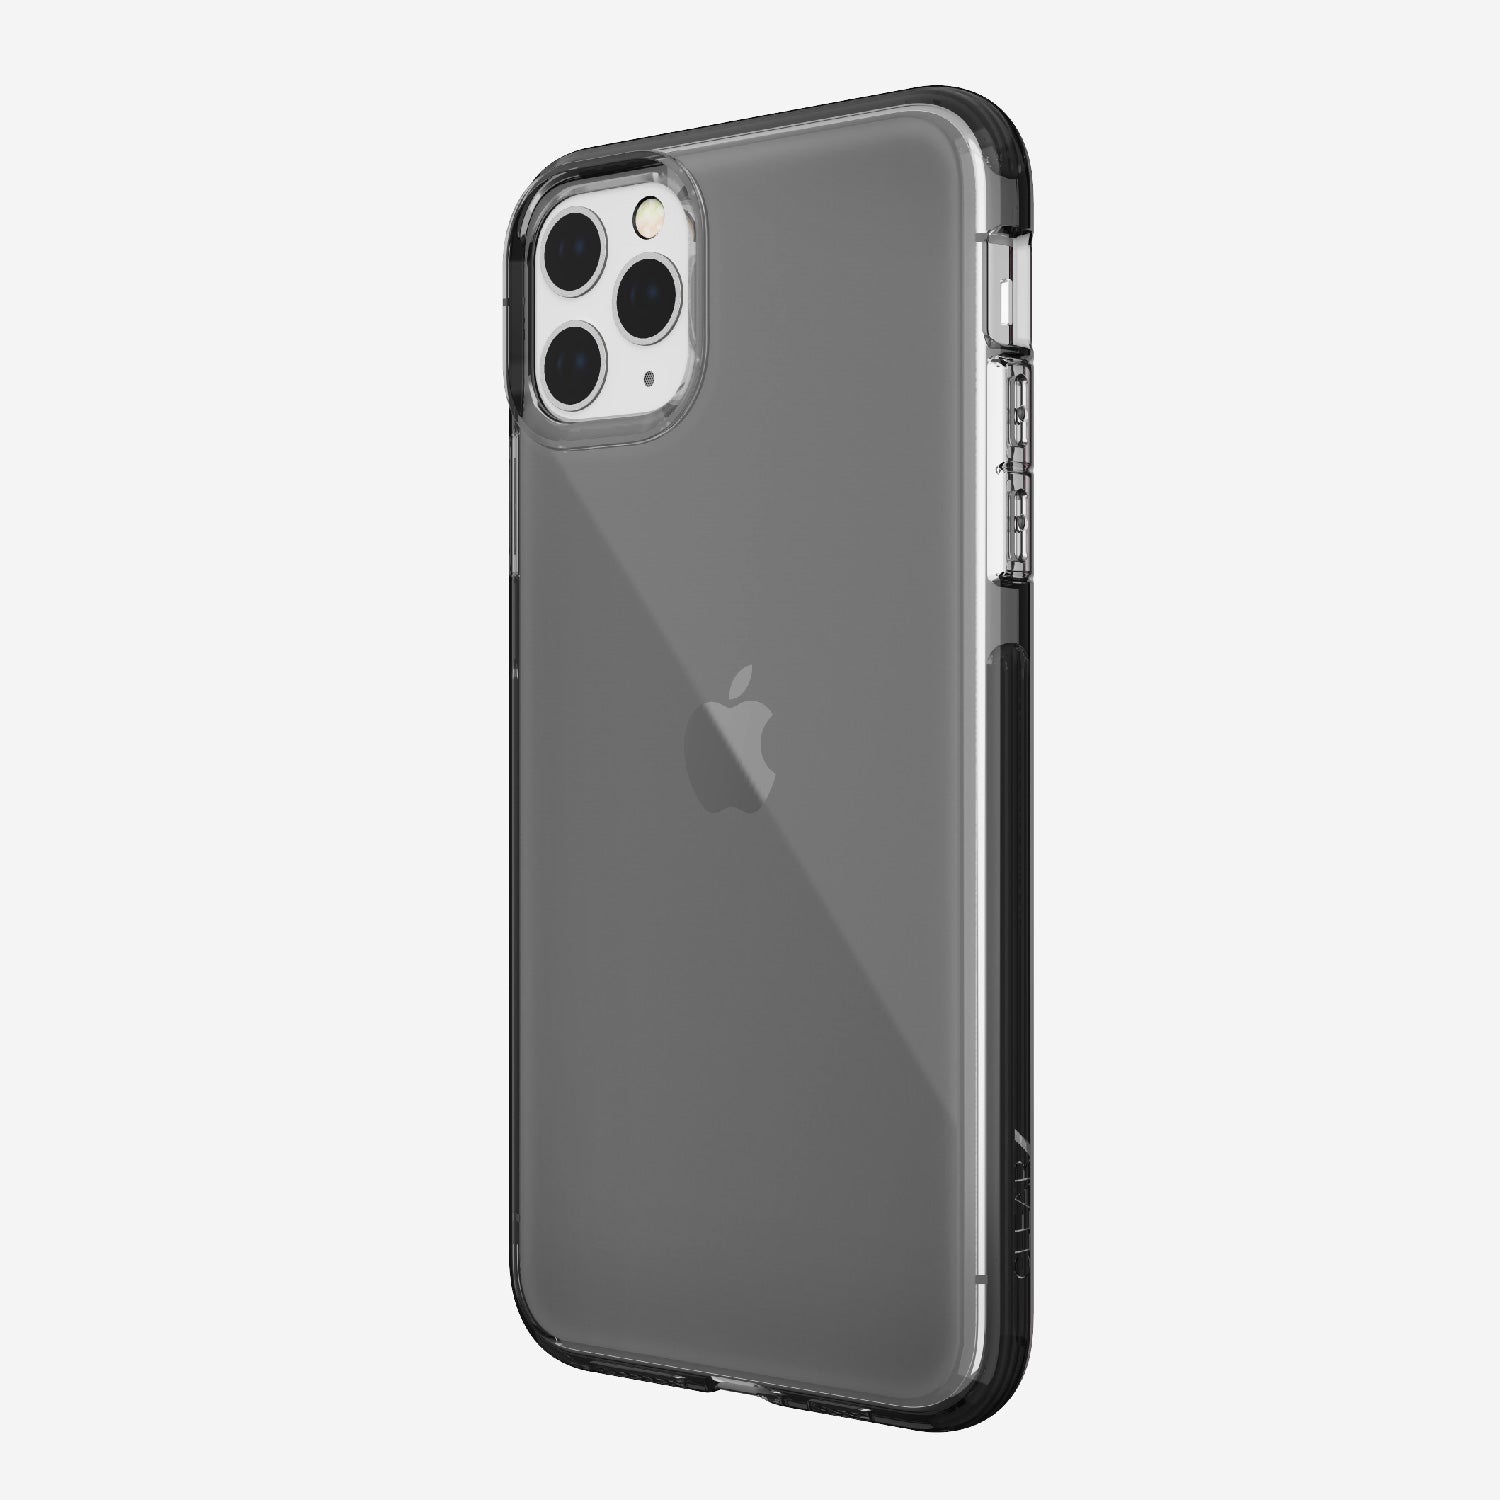 Raptic Clear Iphone 11 Pro Max Cases Covers